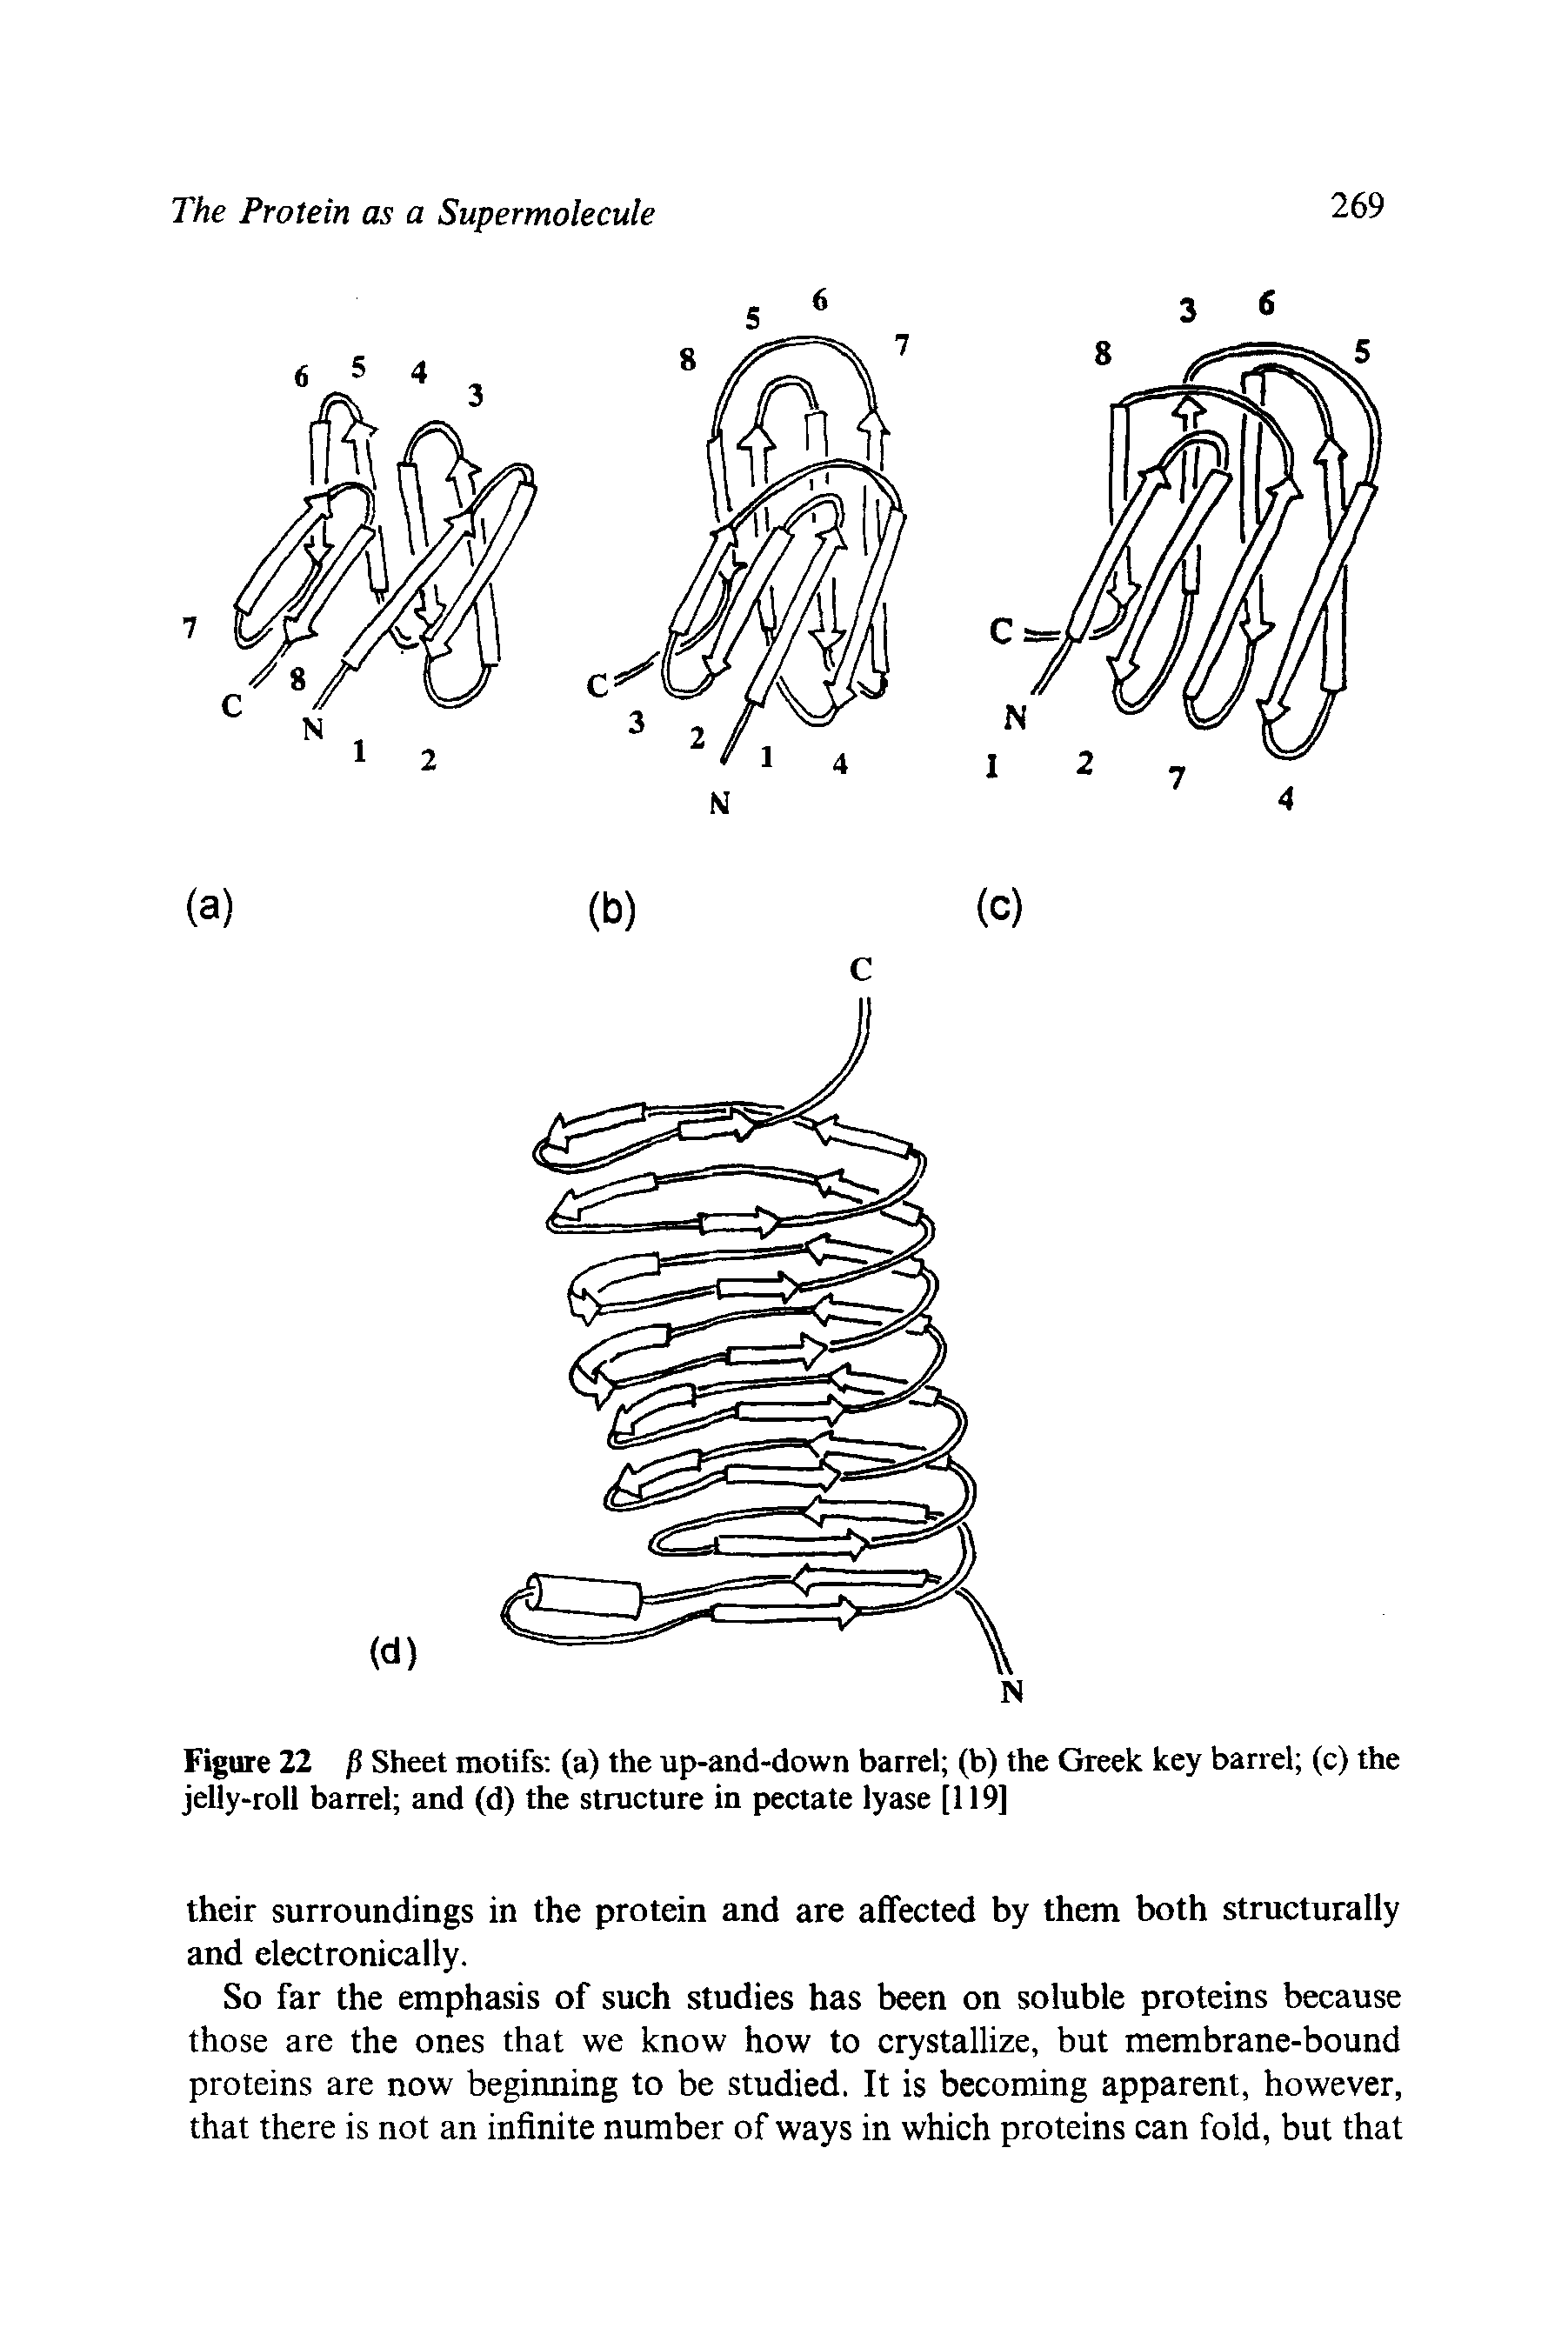 Figure 22 Sheet motifs (a) the up-and-down barrel (b) the Greek key barrel (c) the jelly-roll barrel and (d) the structure in pectate lyase [119]...